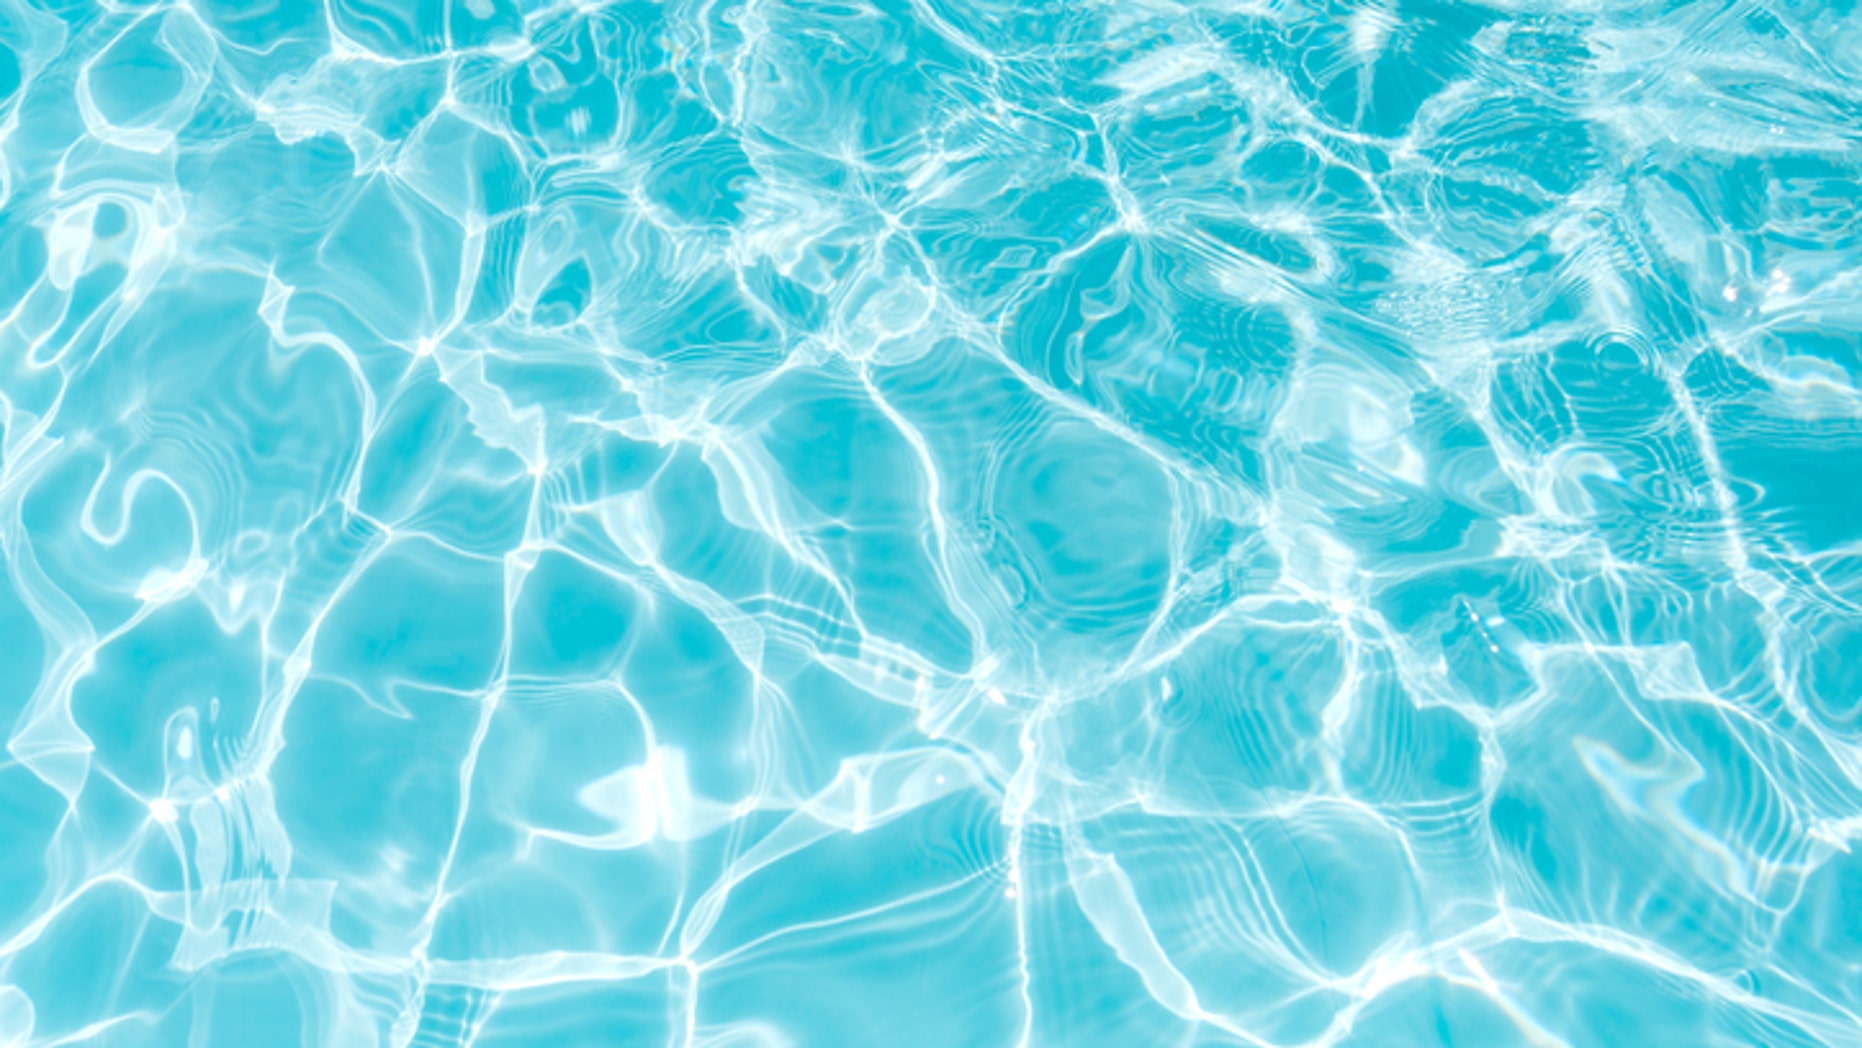 A 14-month-old boy died Saturday after being pulled from a dirty swimming pool at a family event in Arizona, reports said.